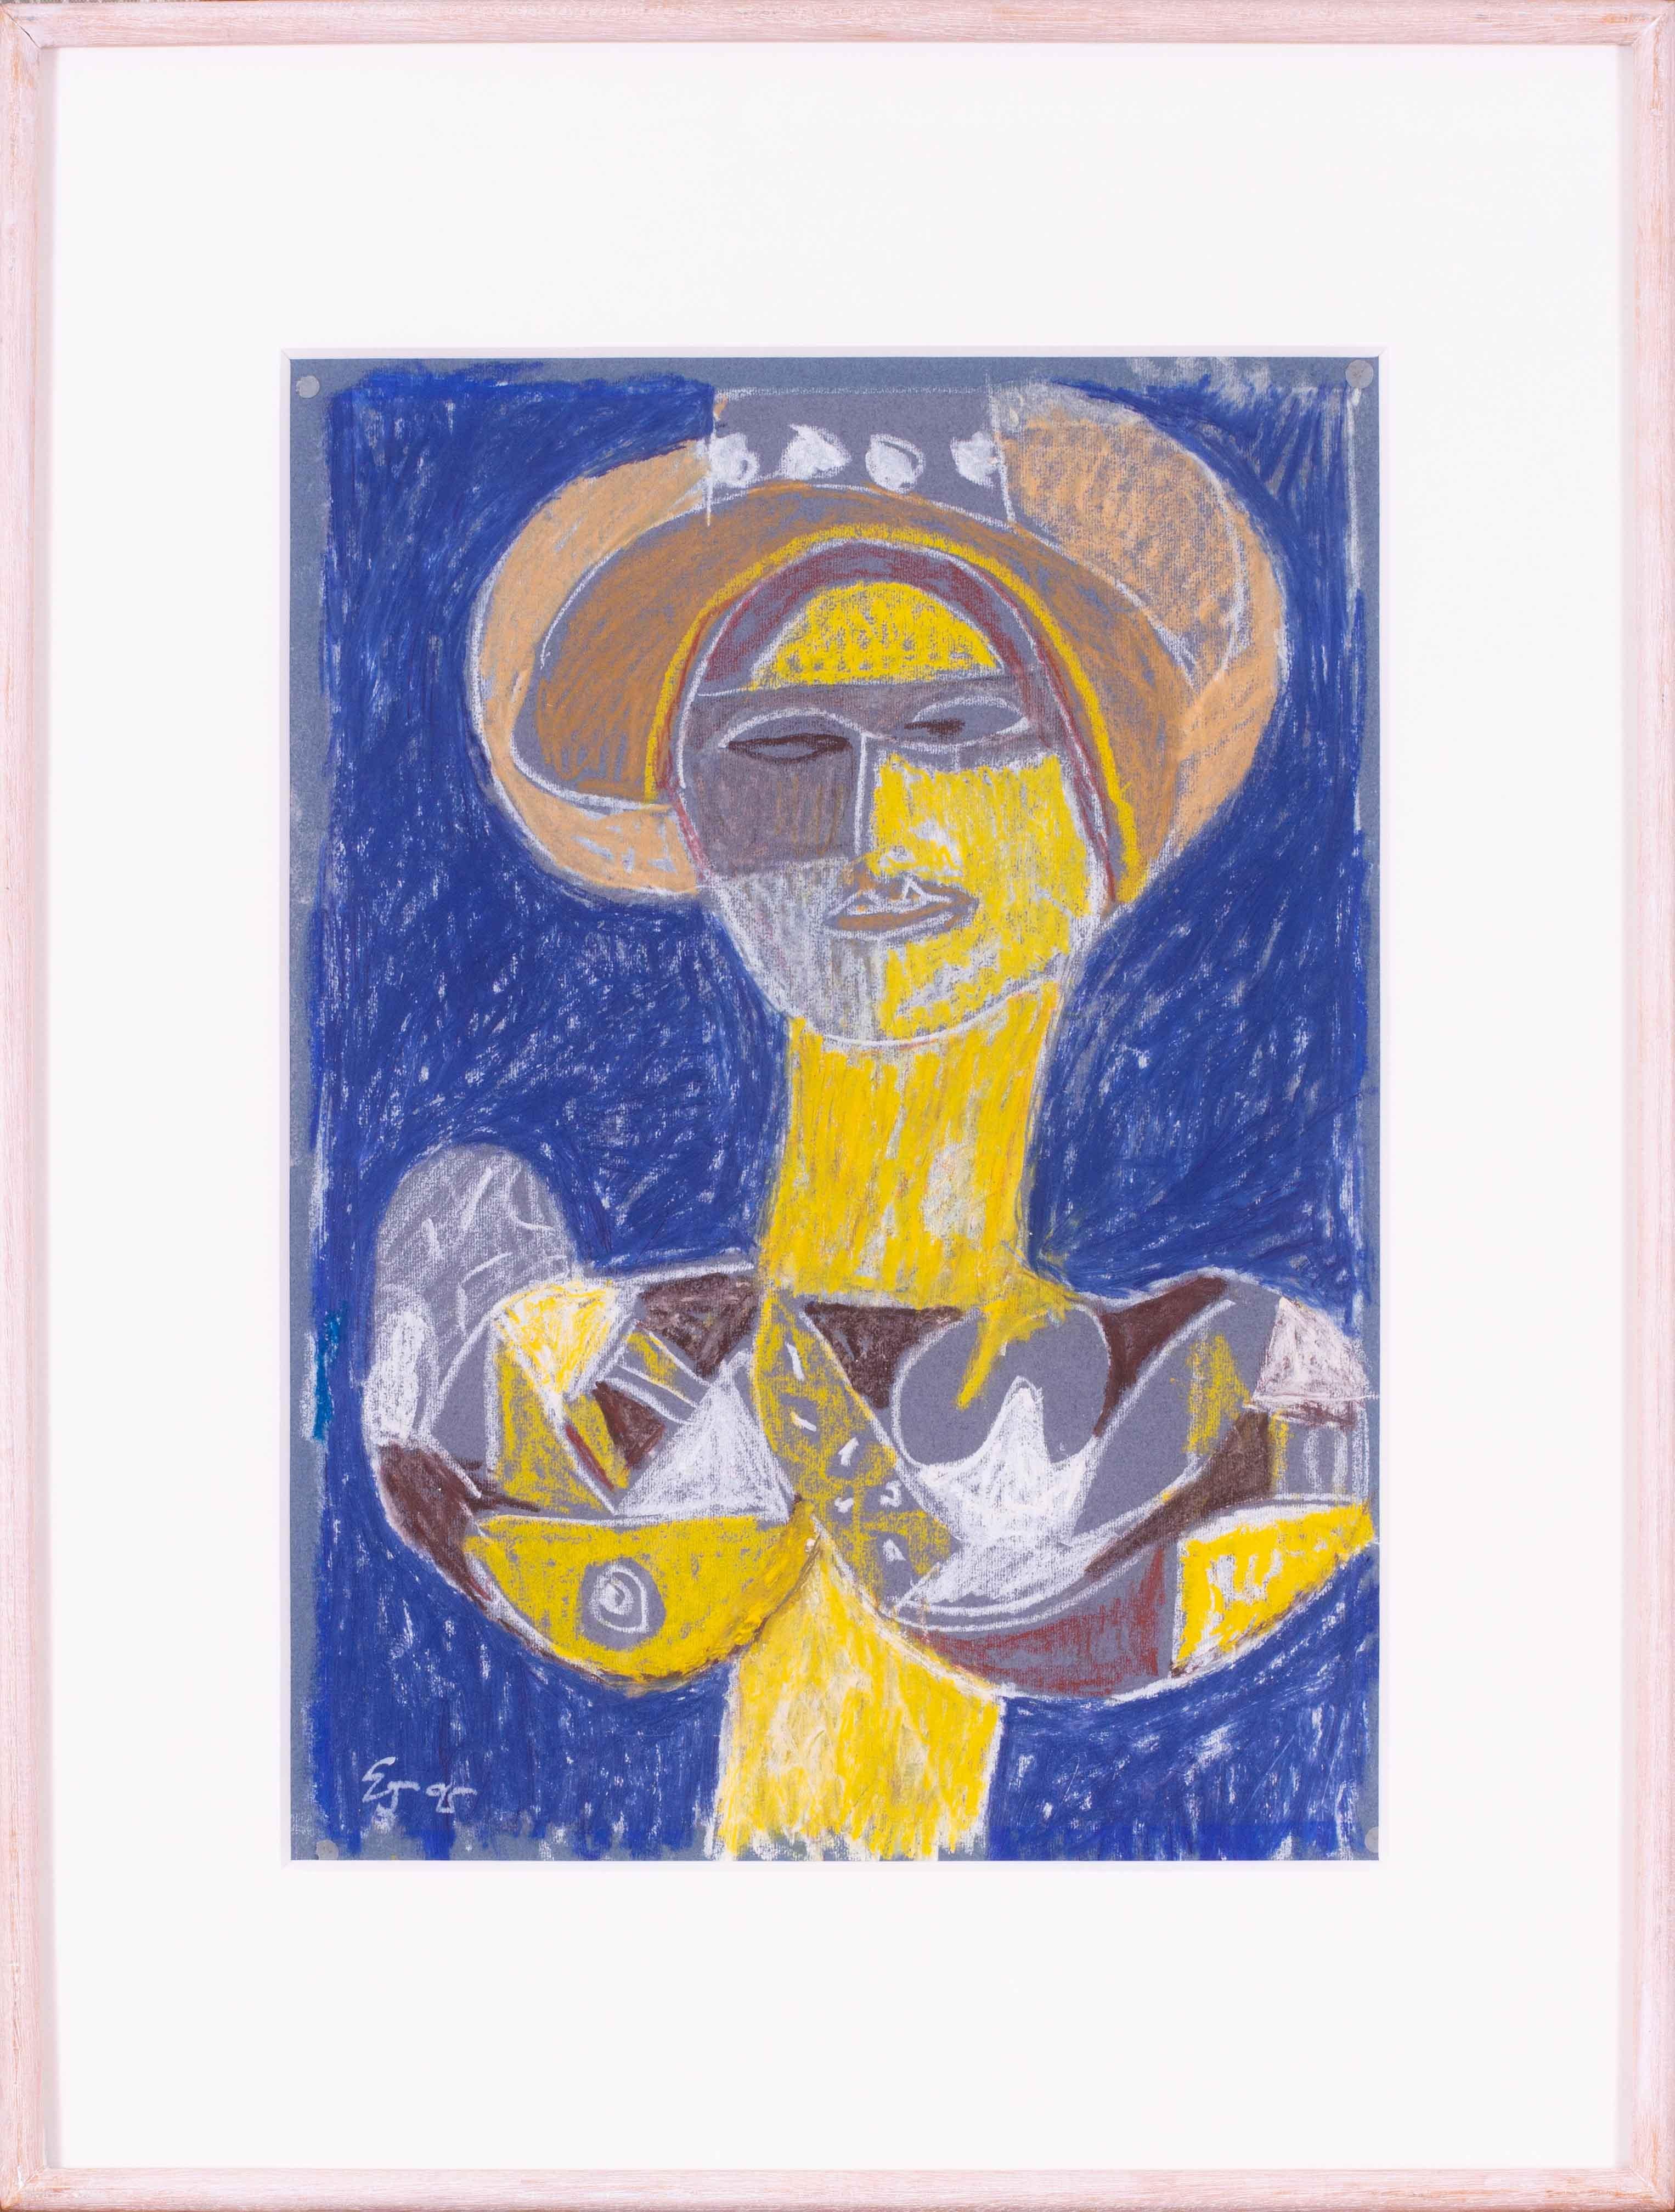 Abstract female in blues and yellow by Modern British 20th C artist, Ewart Johns